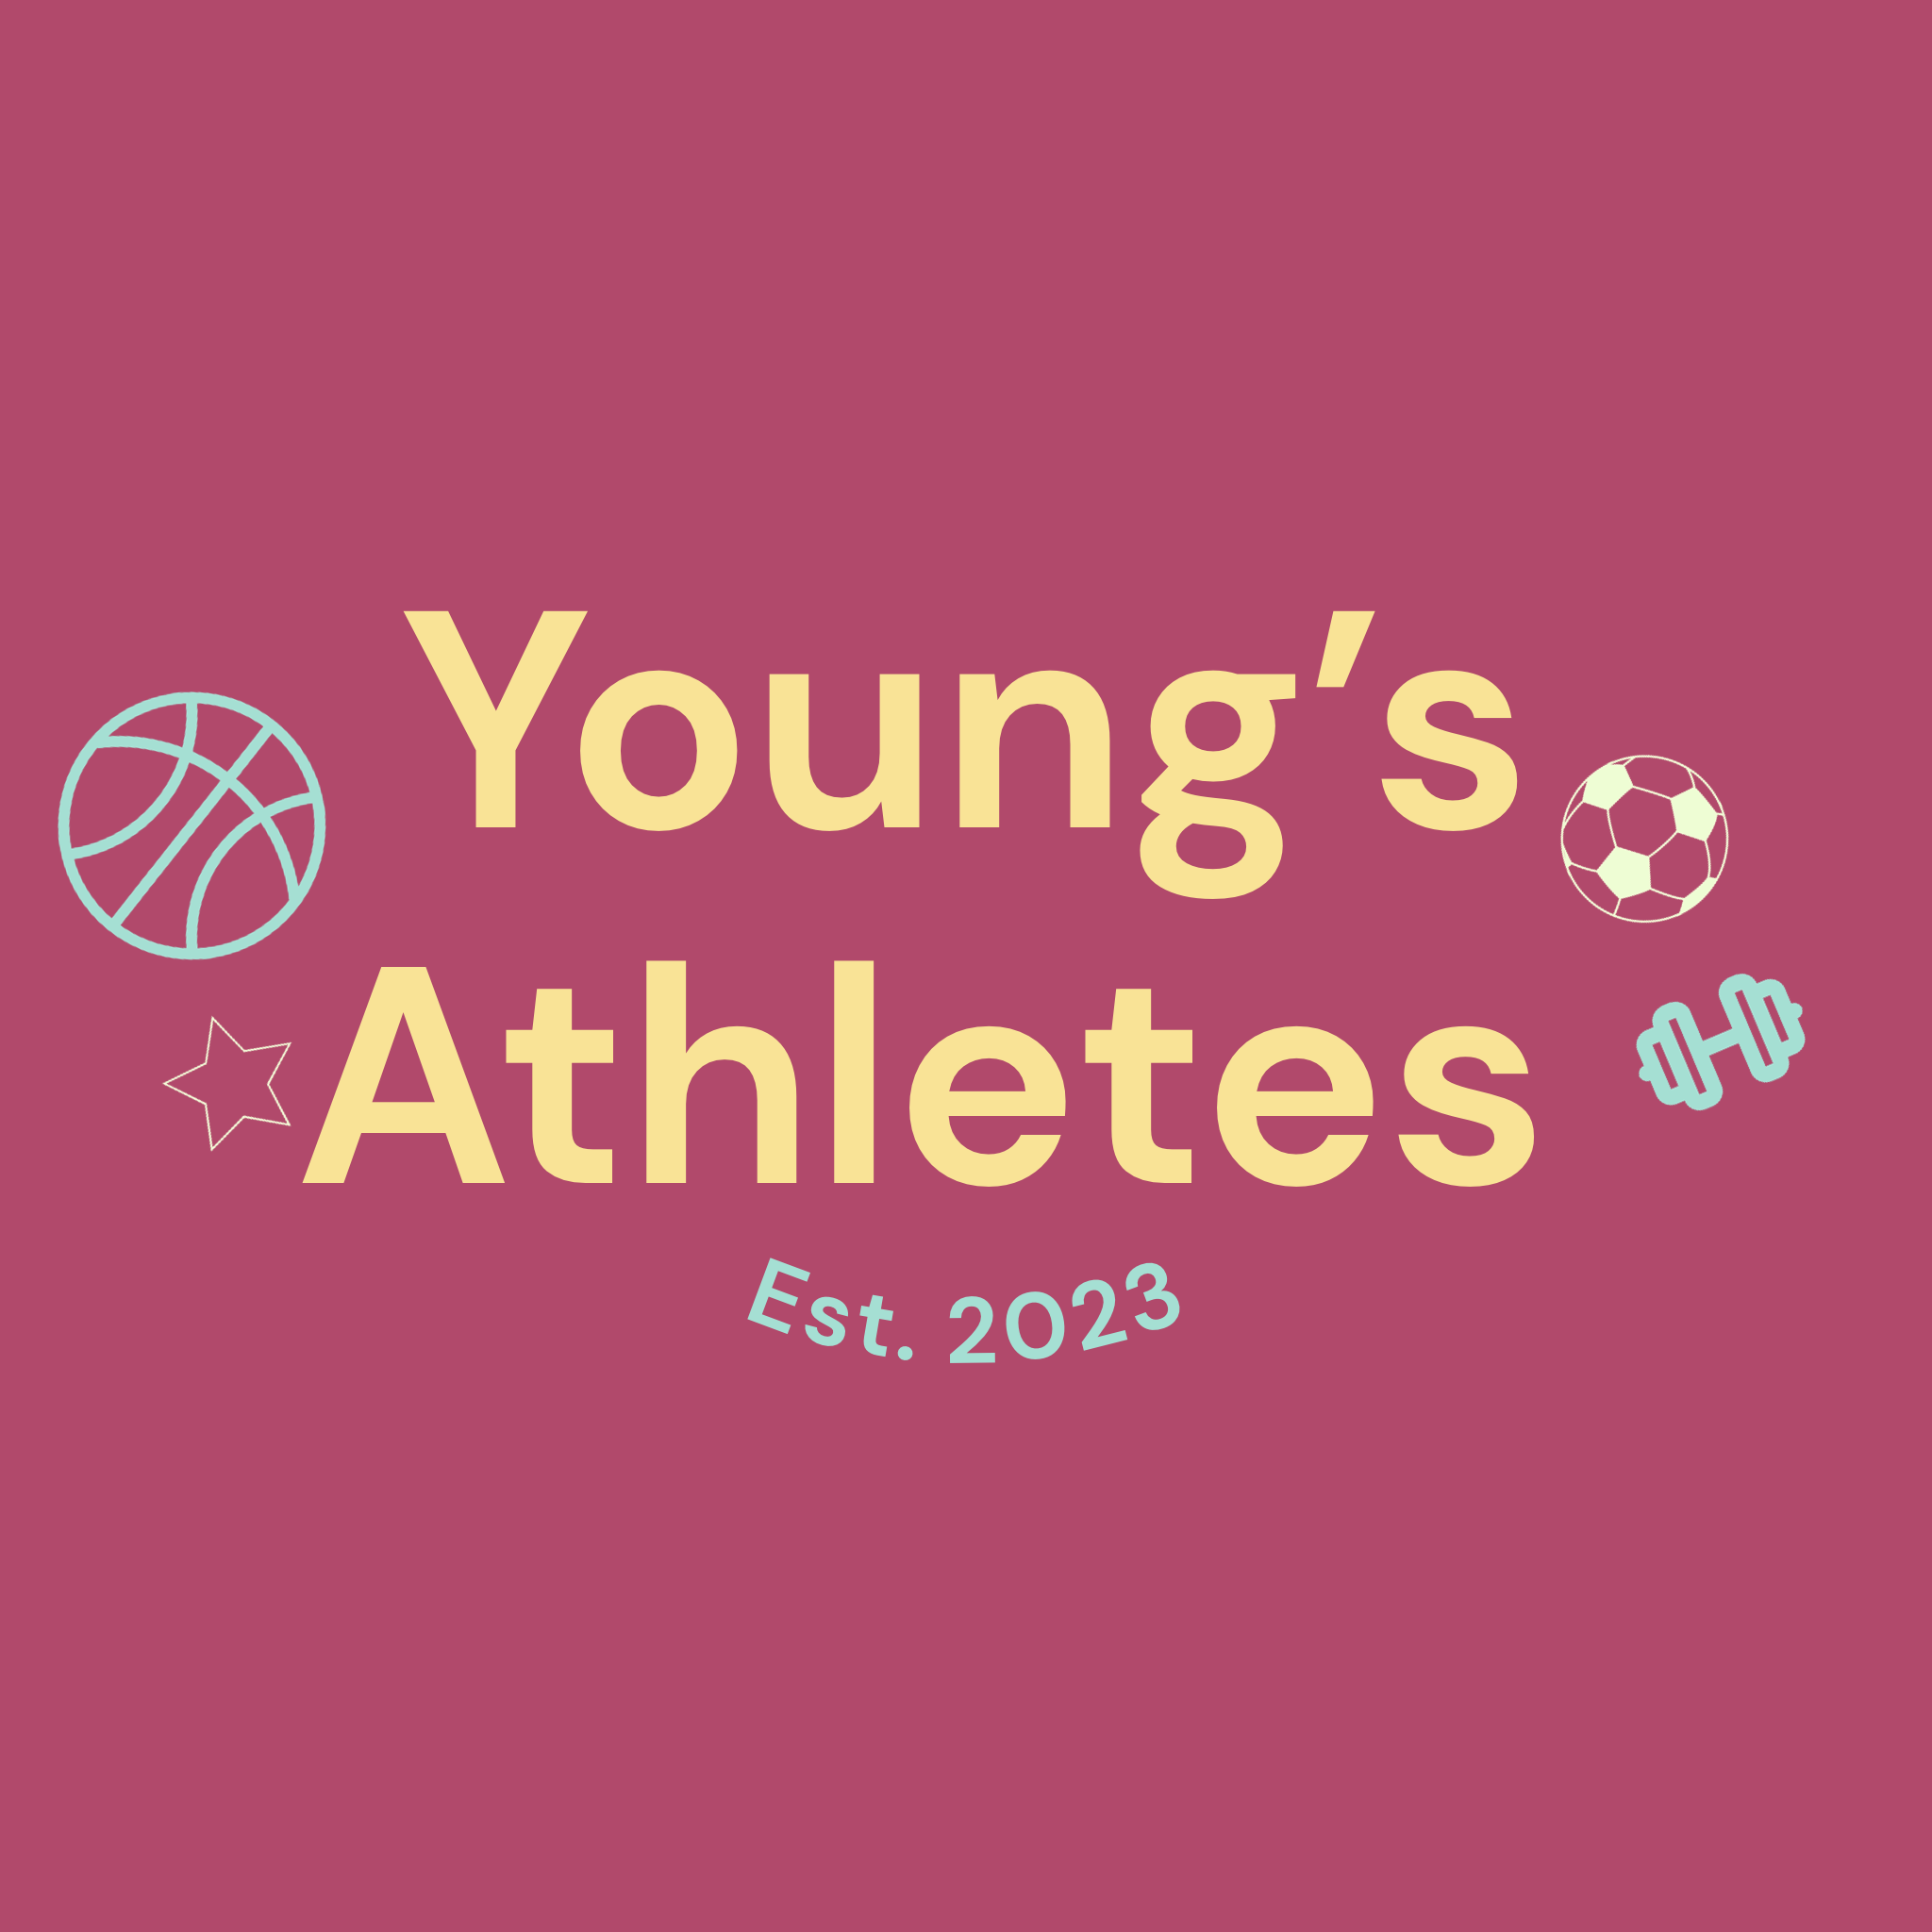 Young’s Athletes's logo